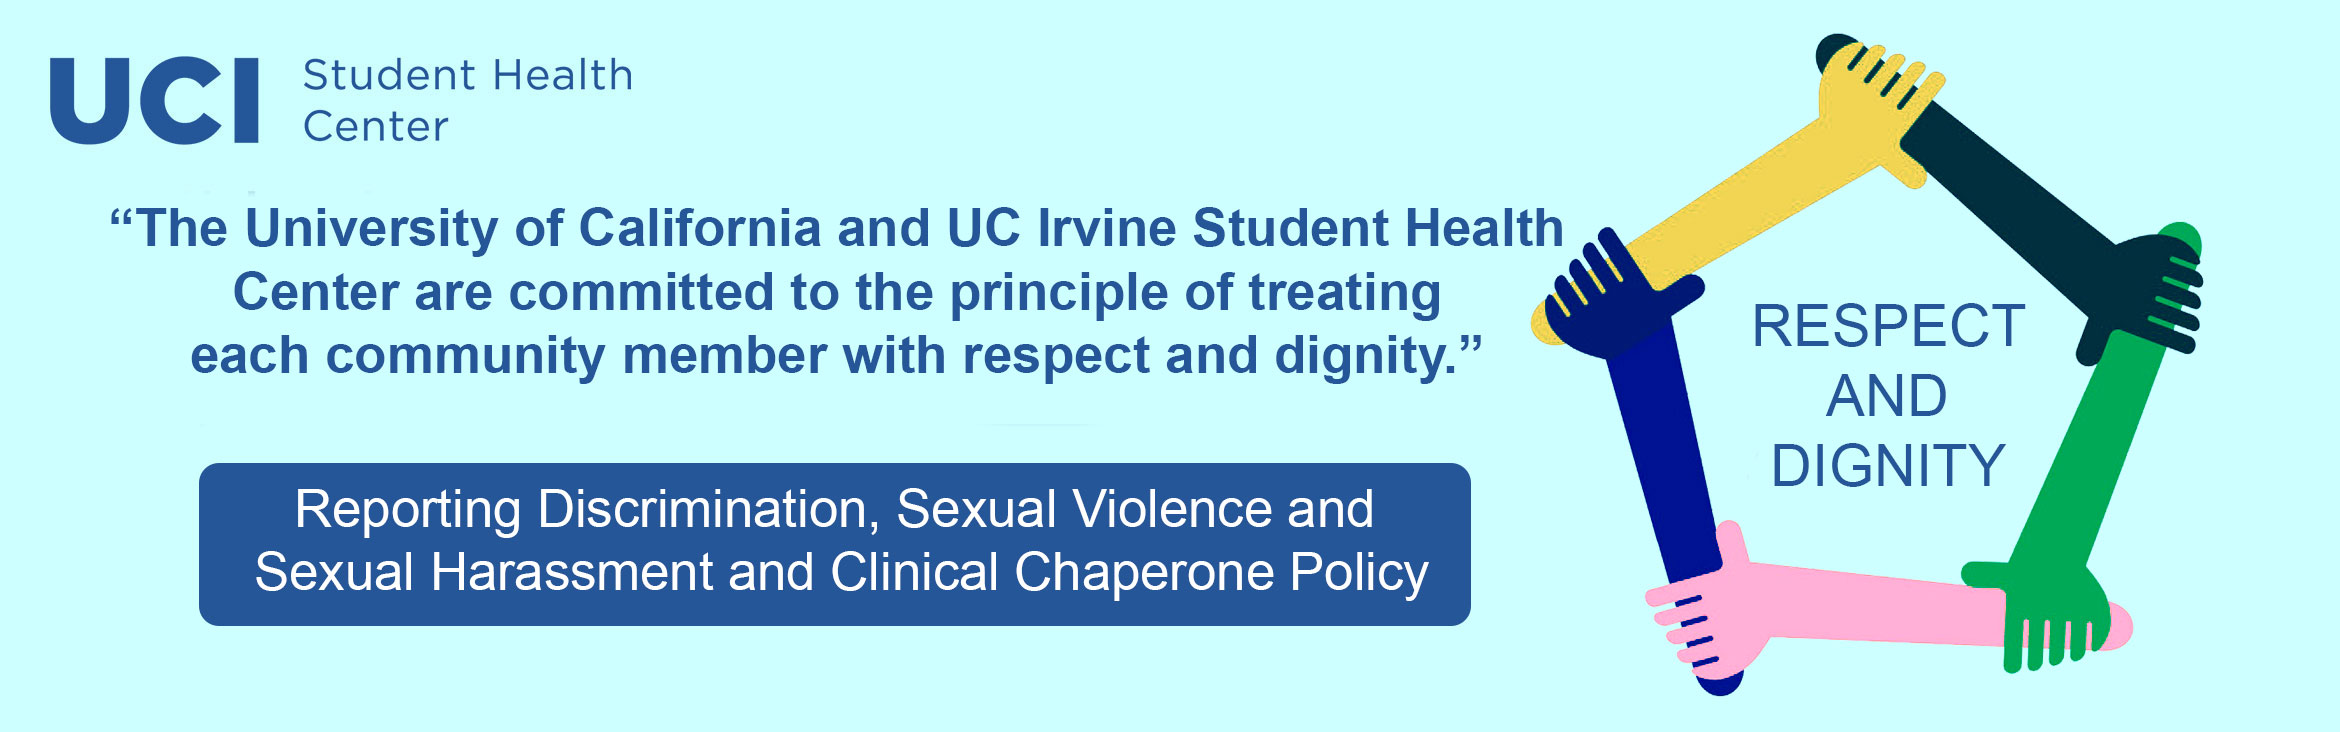 The University of California and UC Irvine Student Health Center are committed to the principle of treating each community member with respect and dignity.